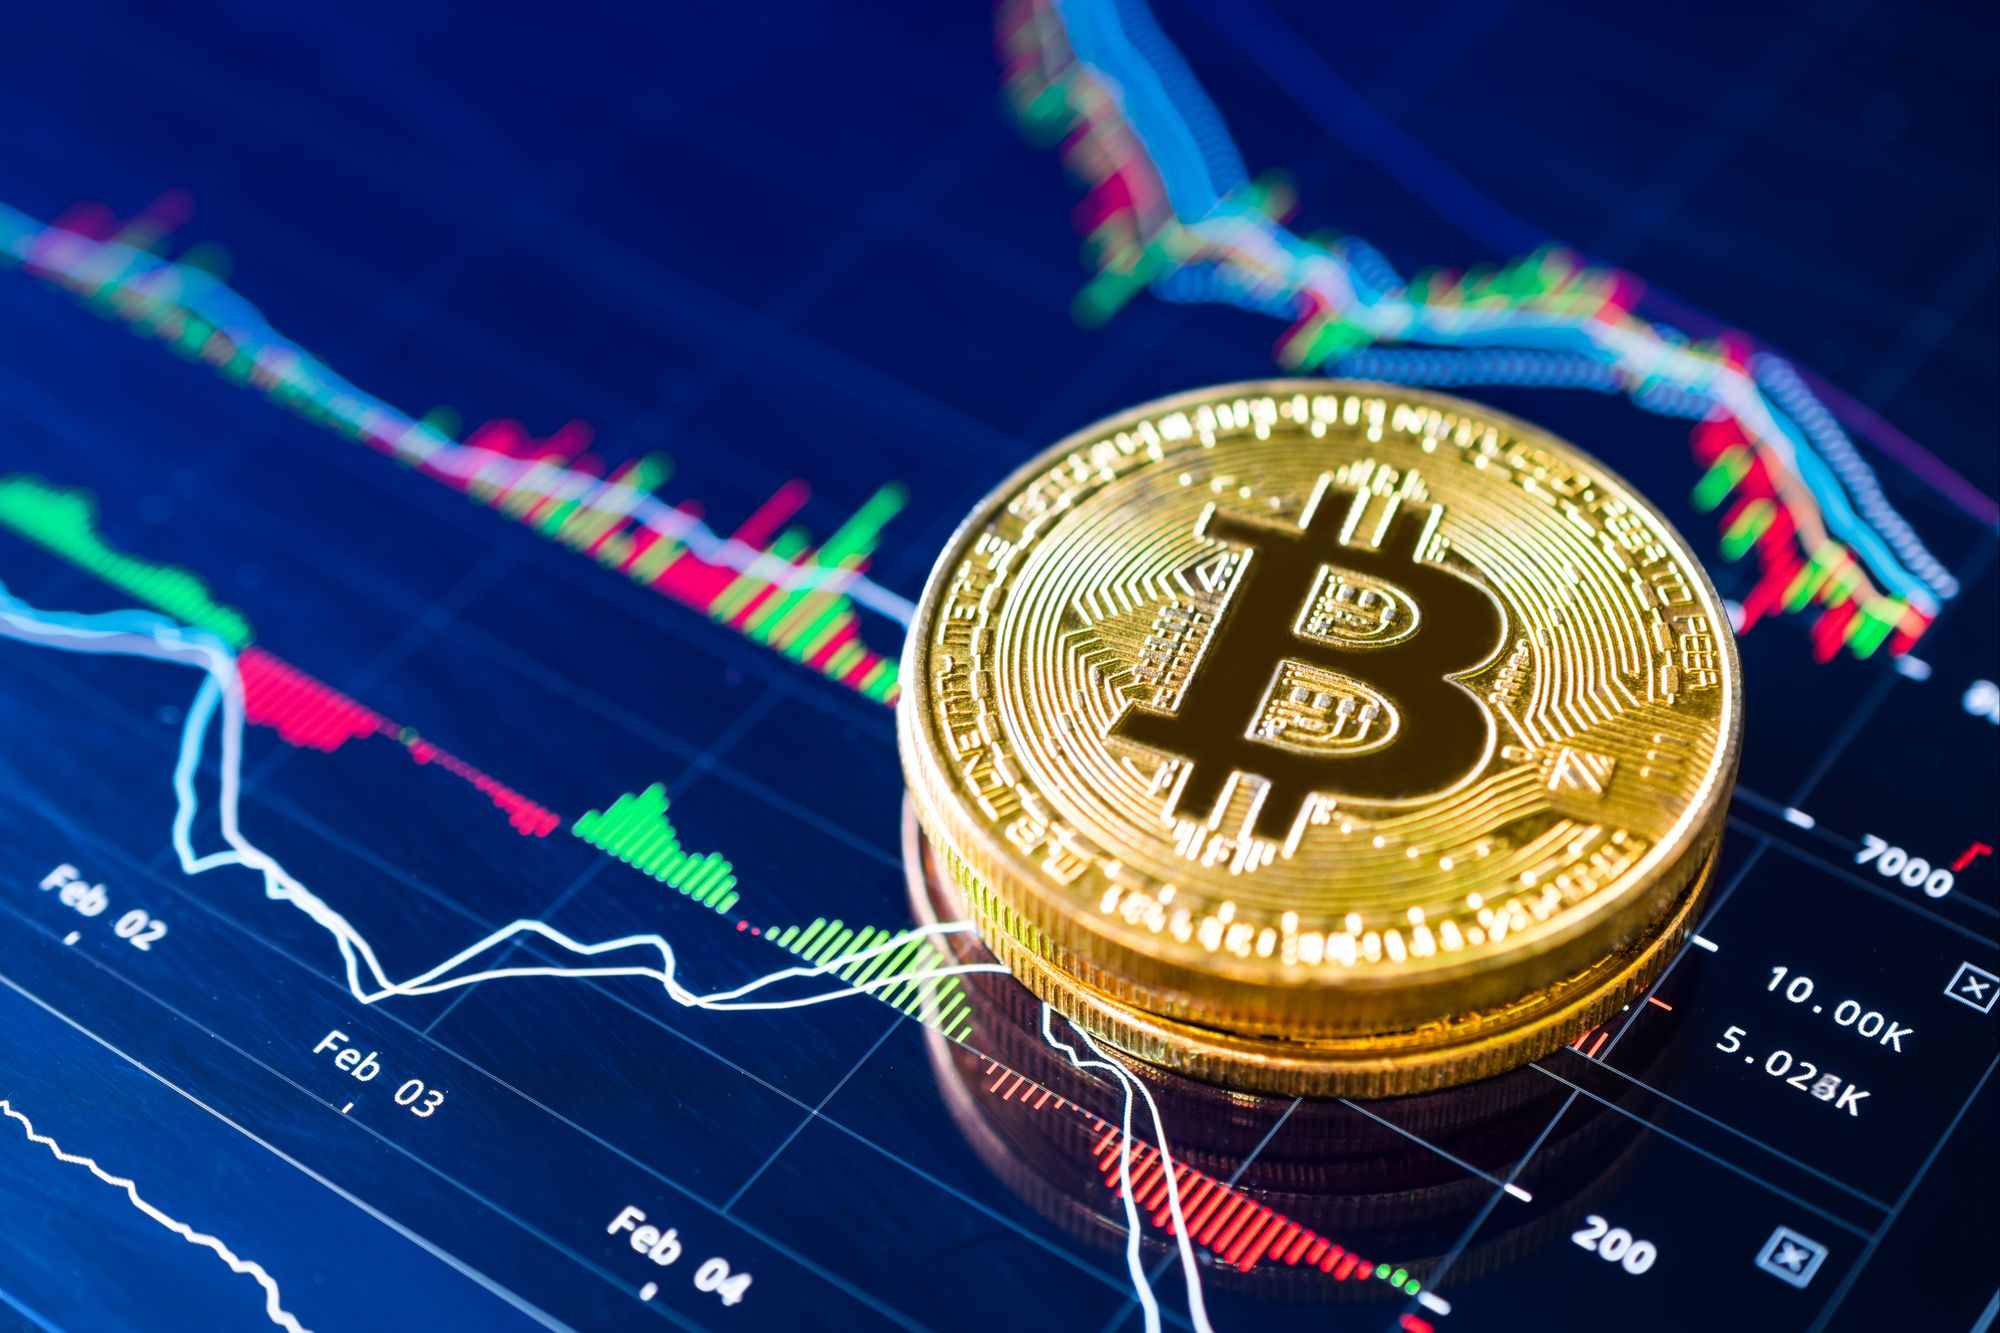 What Is Causing the Most Recent BTC Price Drop?